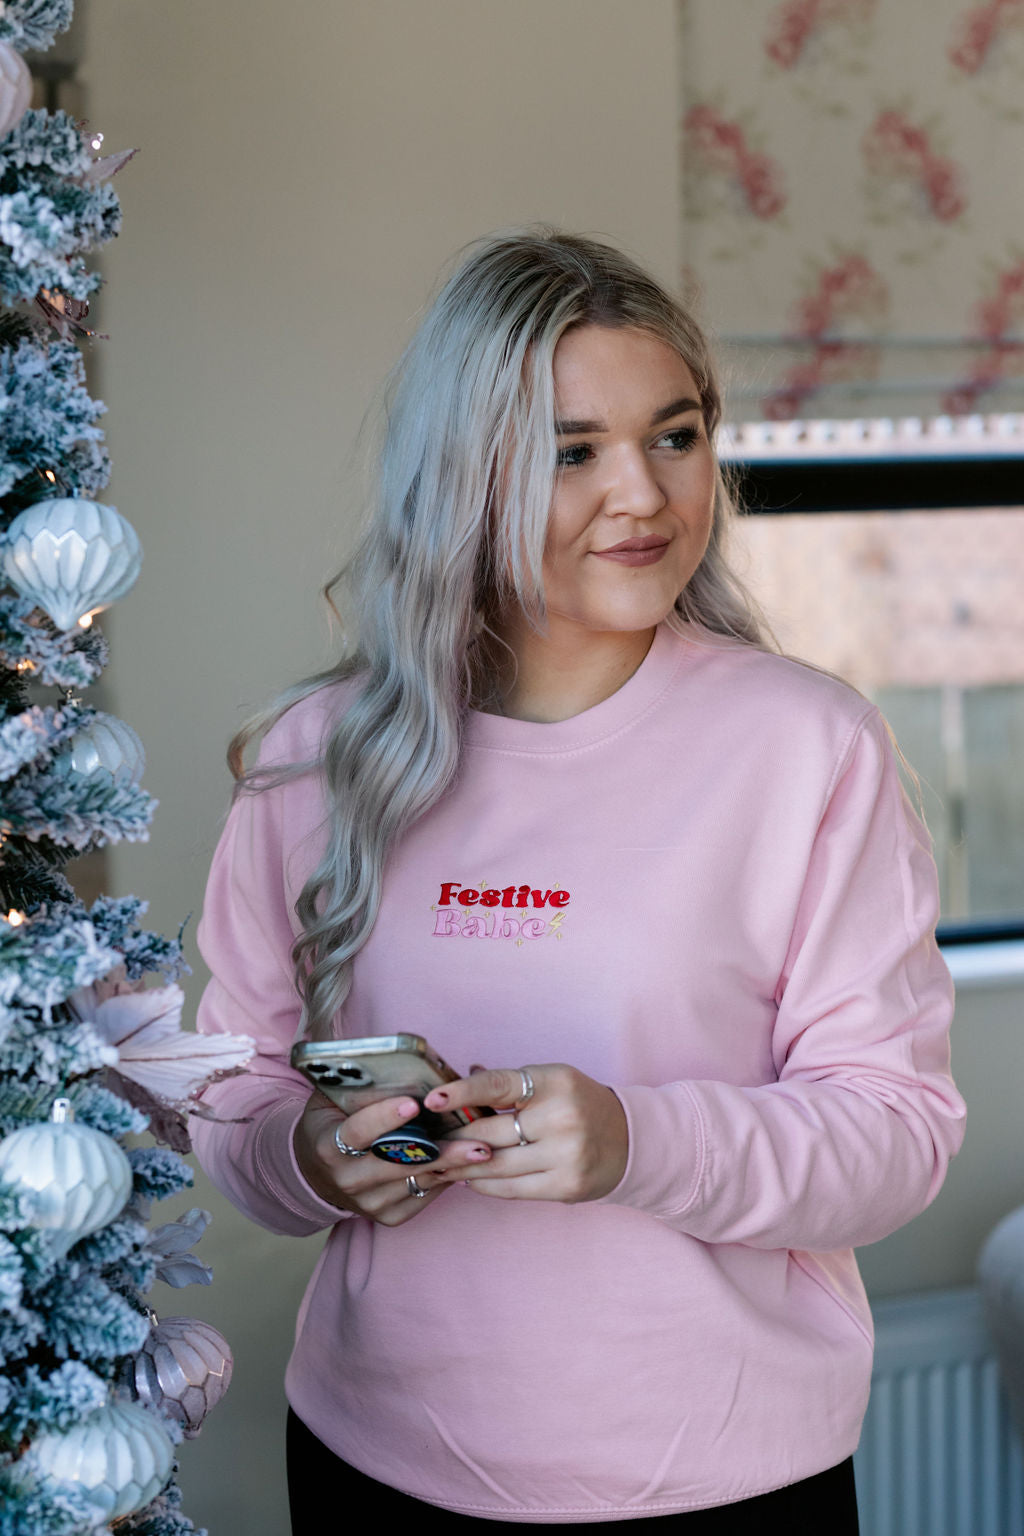 SAMPLE SALE 'Festive Babe' Baby Pink Sweater, L, XL